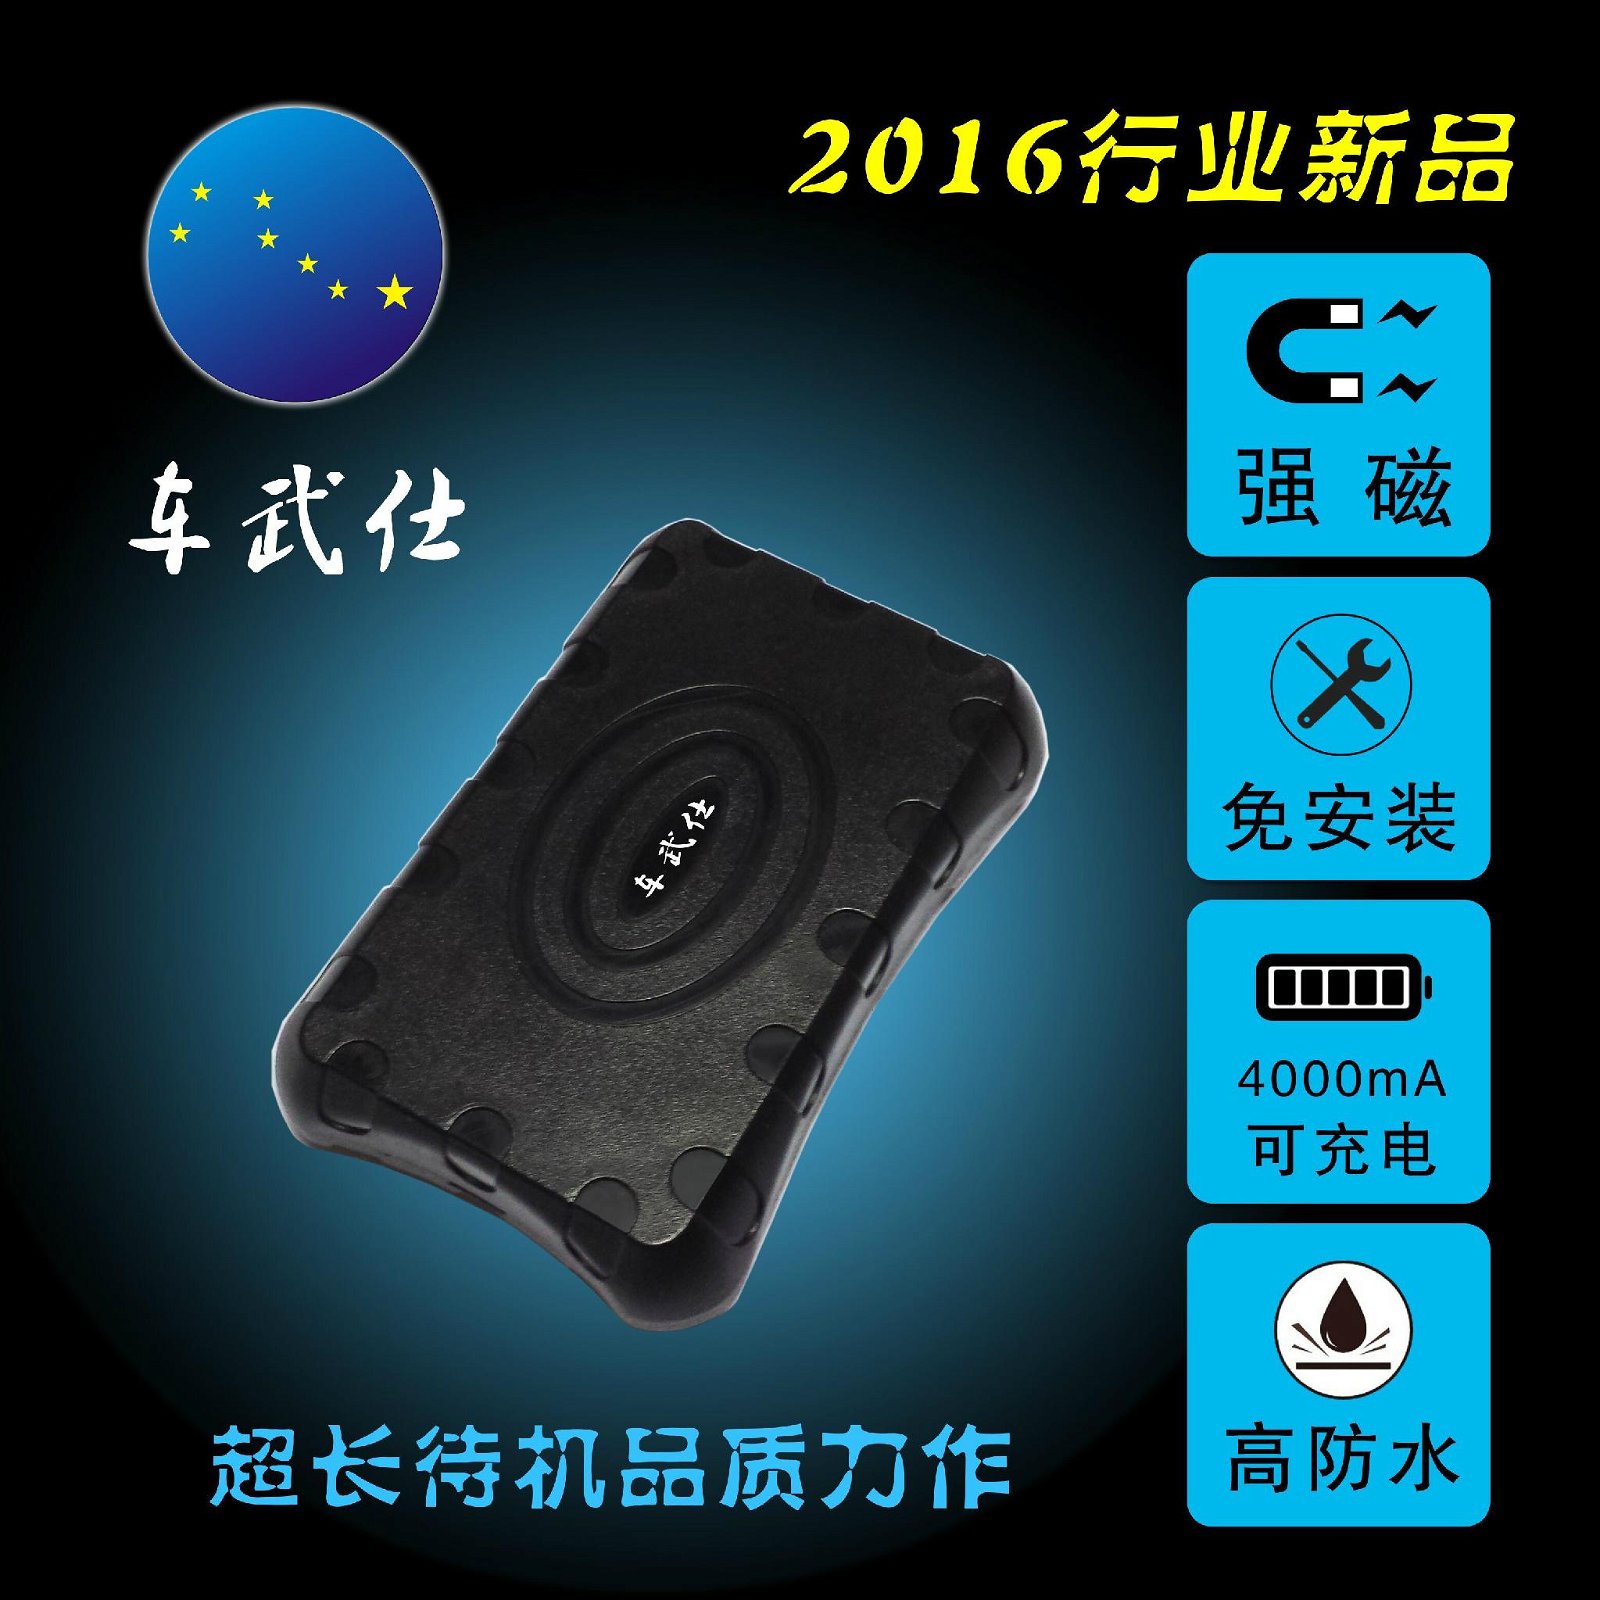 GPS free installation of long standby vehicle tracking alarm wireless tracker 5